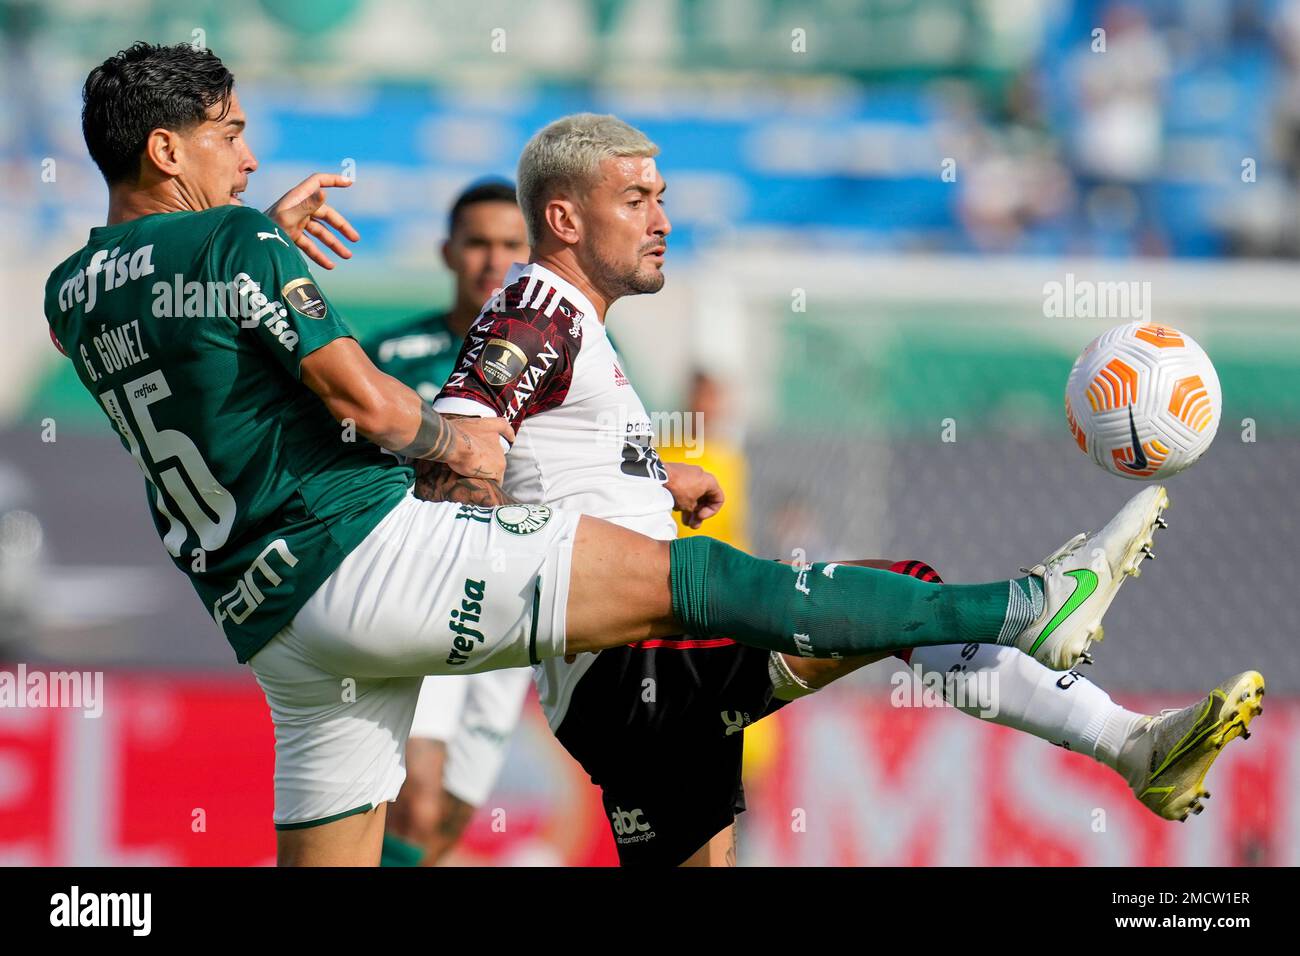 Gustavo Gomez of Brazil's Palmeiras heads the ball challenged by Carlos  Carmona of Chile's Colo Colo, right, during a quarter final second leg Copa Libertadores  soccer match in Sao Paulo, Brazil, Wednesday